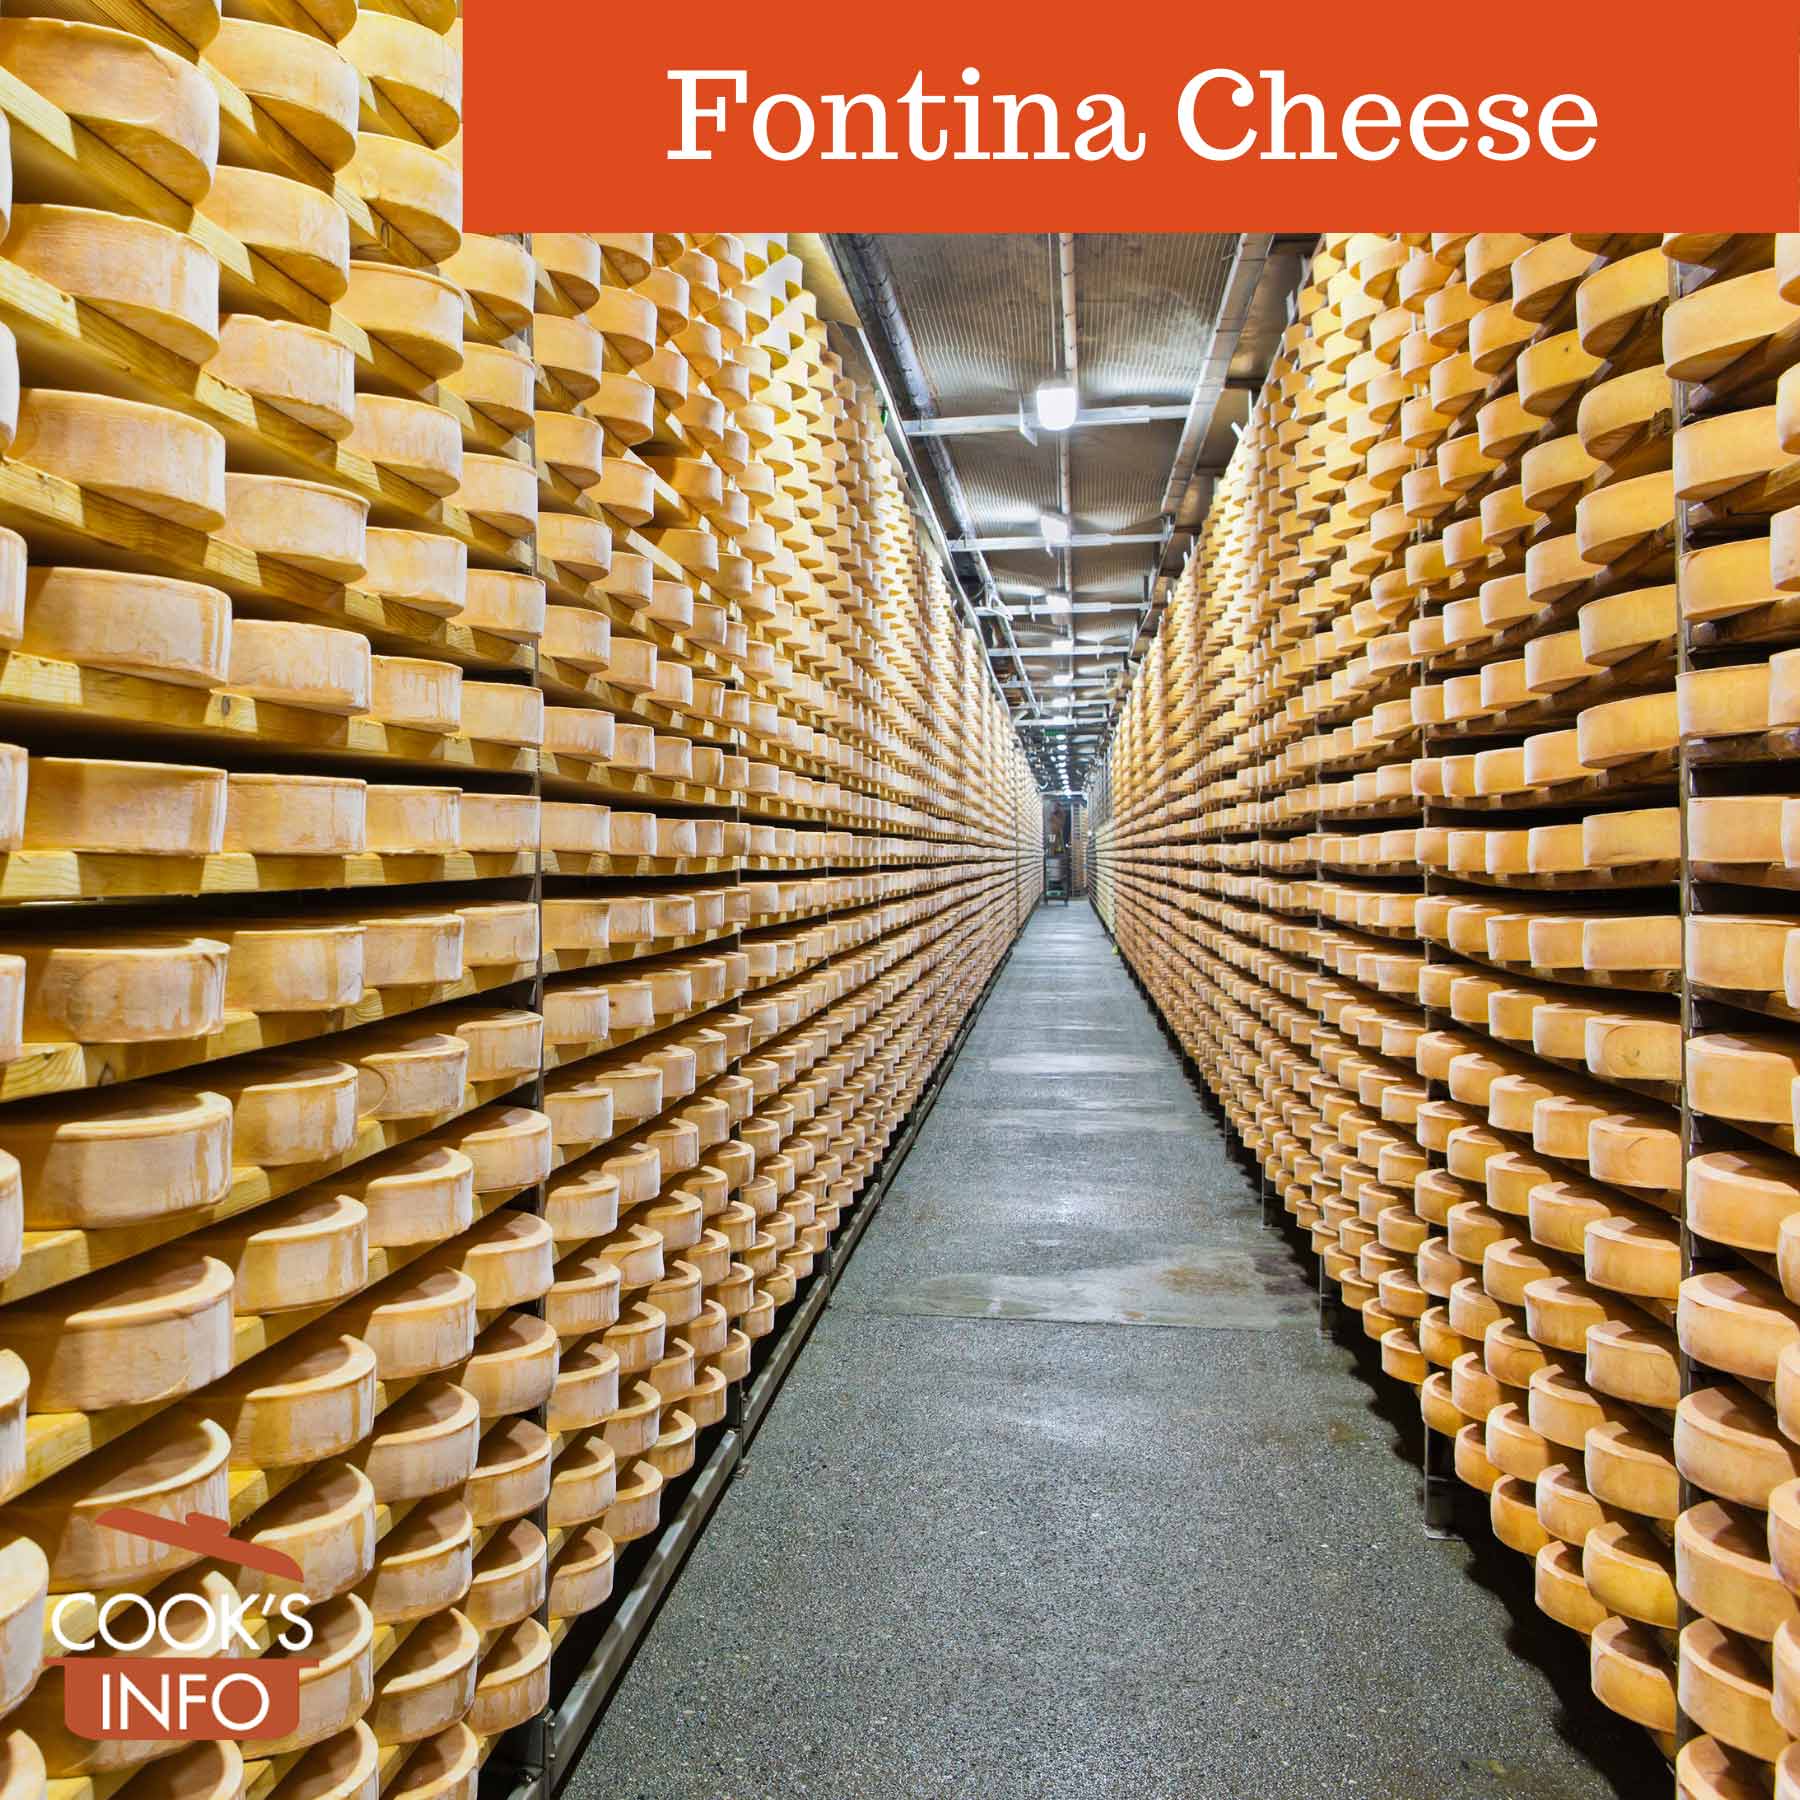 Fontina Cheese aging on pine shelves